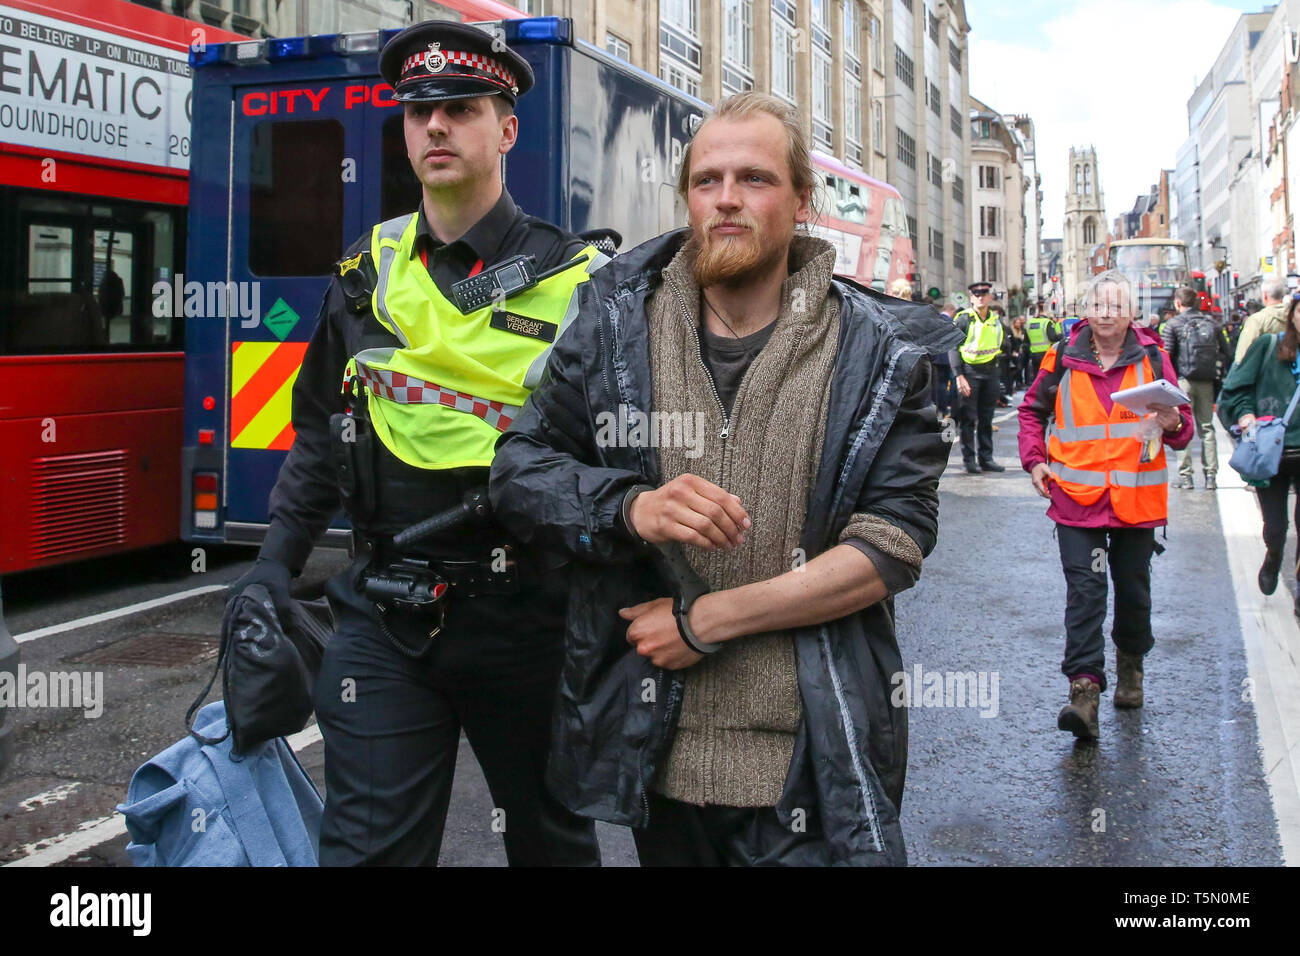 Police officer are seen arresting an environmental activist from Extinction Rebellion Movement Group on Fleet Street during the protest. The eleventh day of the ongoing protest demanding decisive action from the UK Government on the environmental crisis. Stock Photo